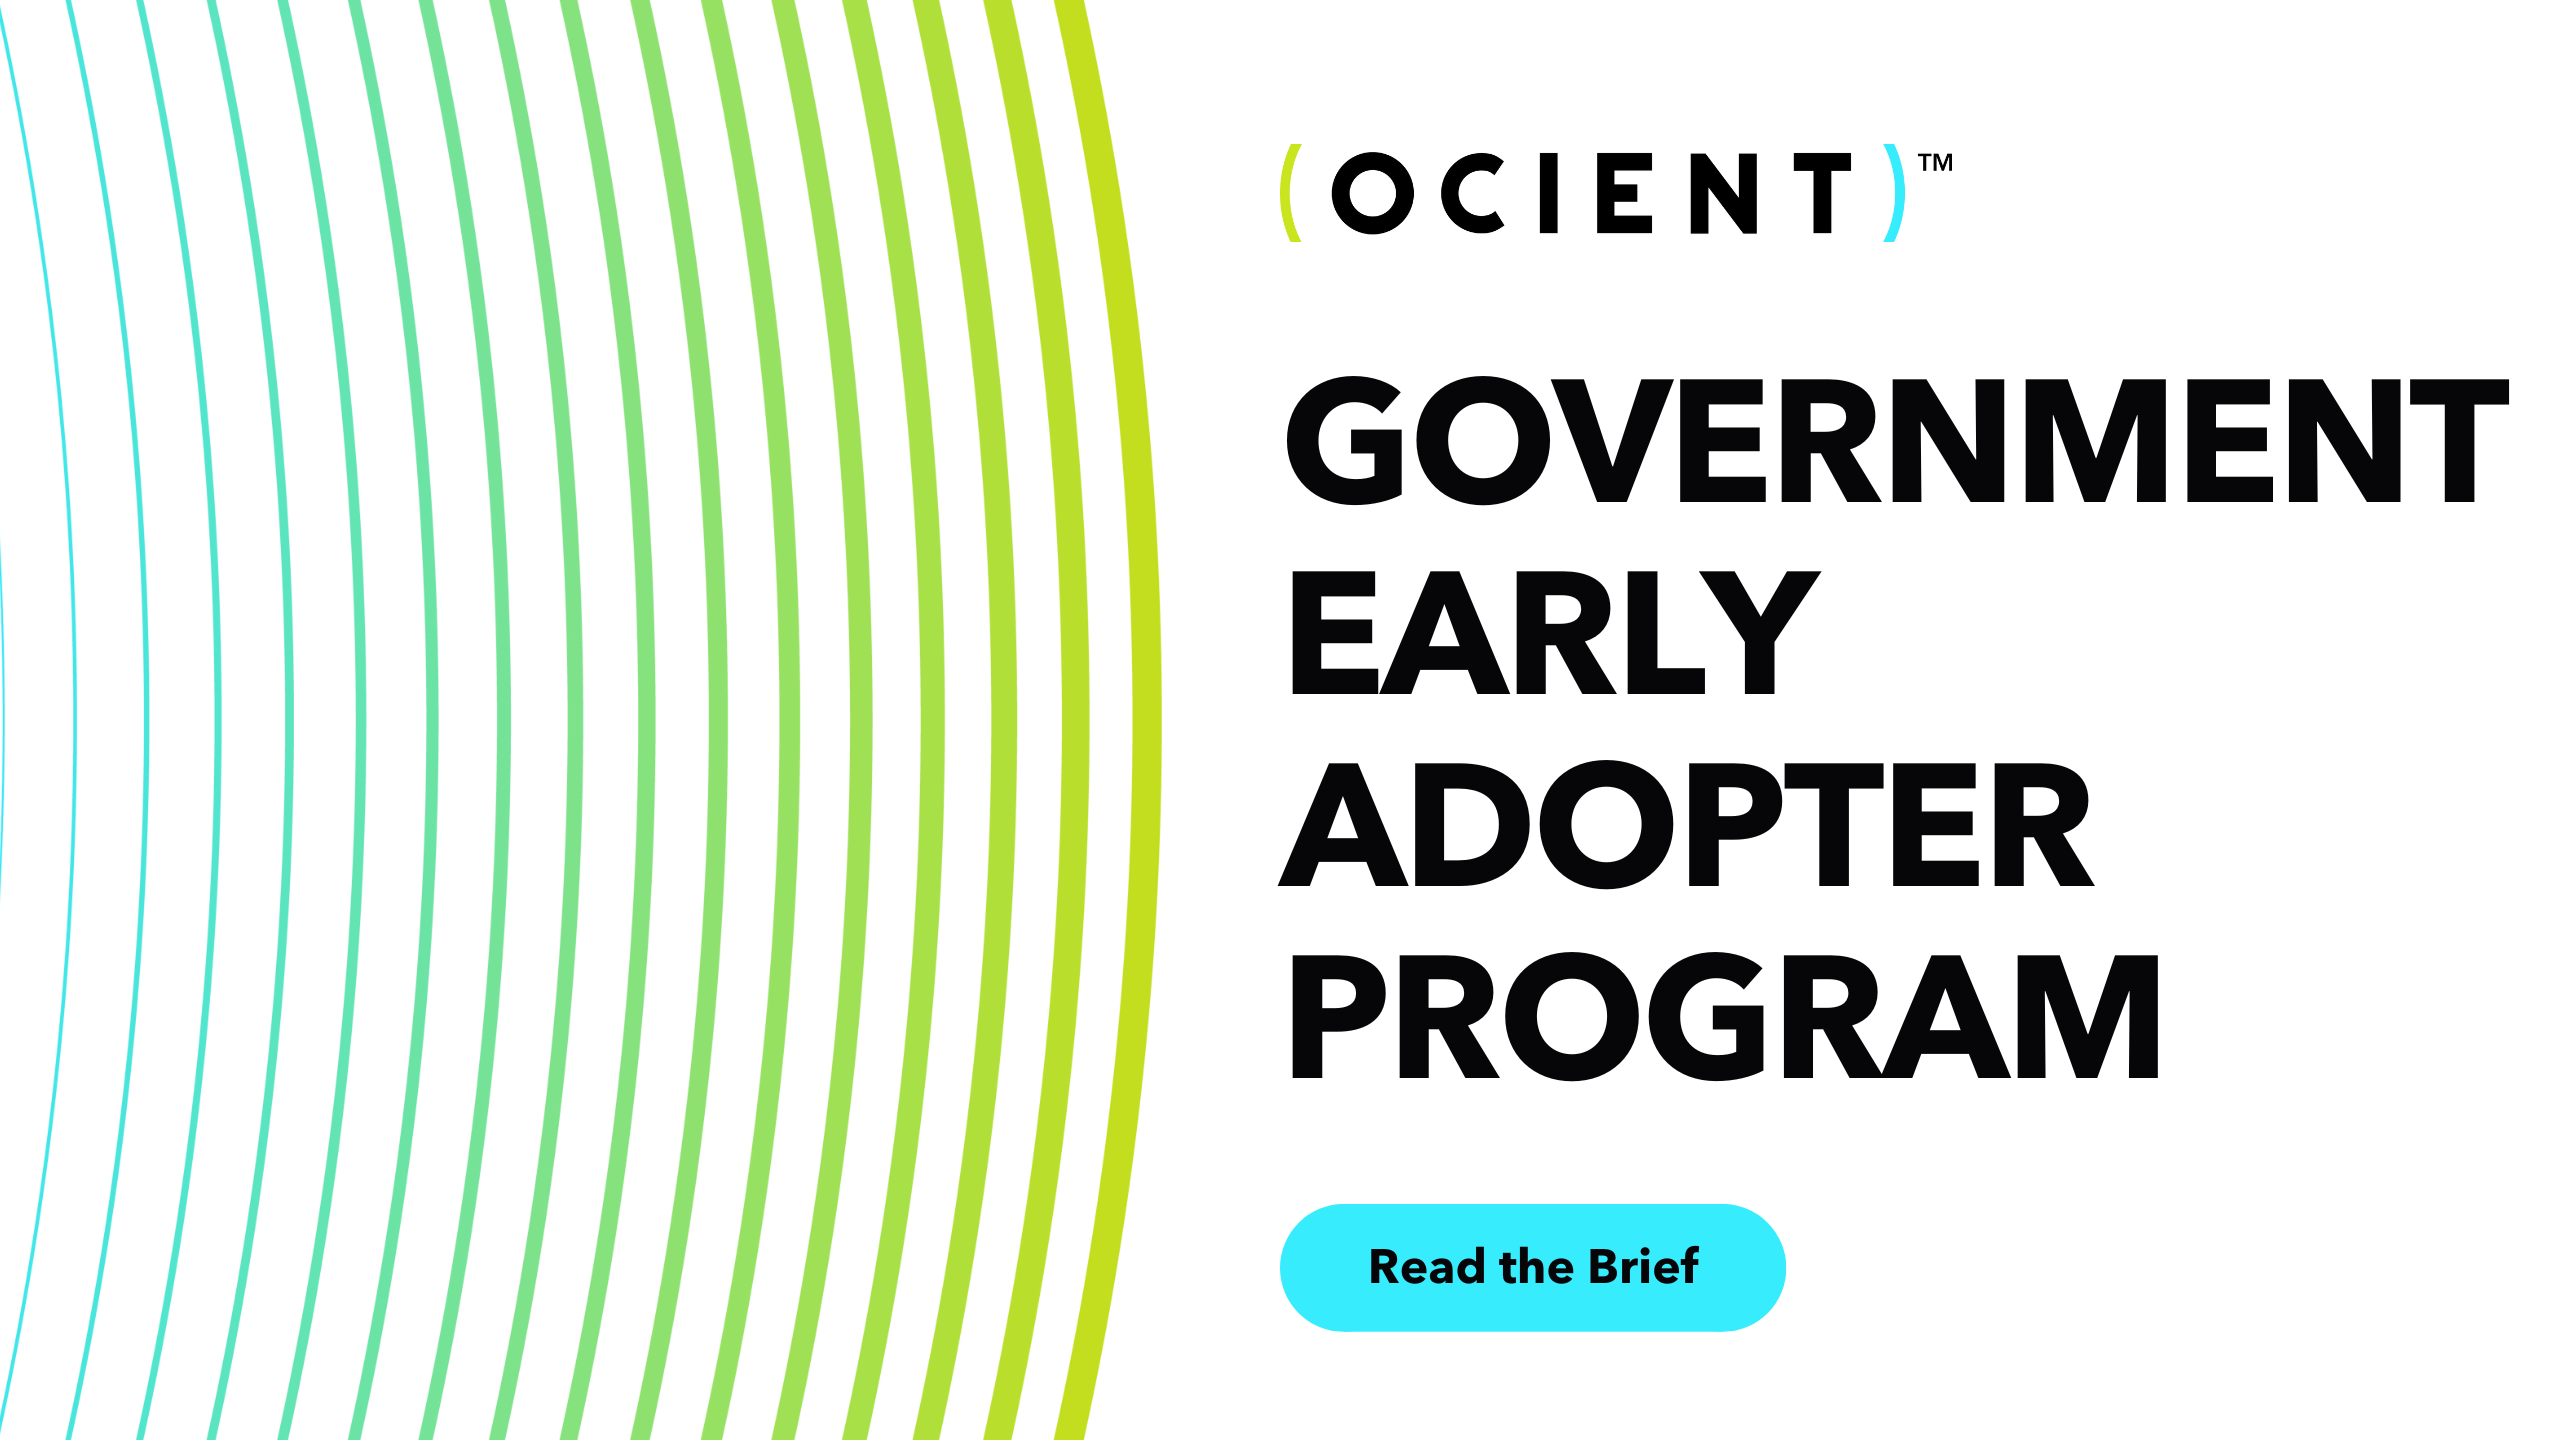 Ocient government early adopter program